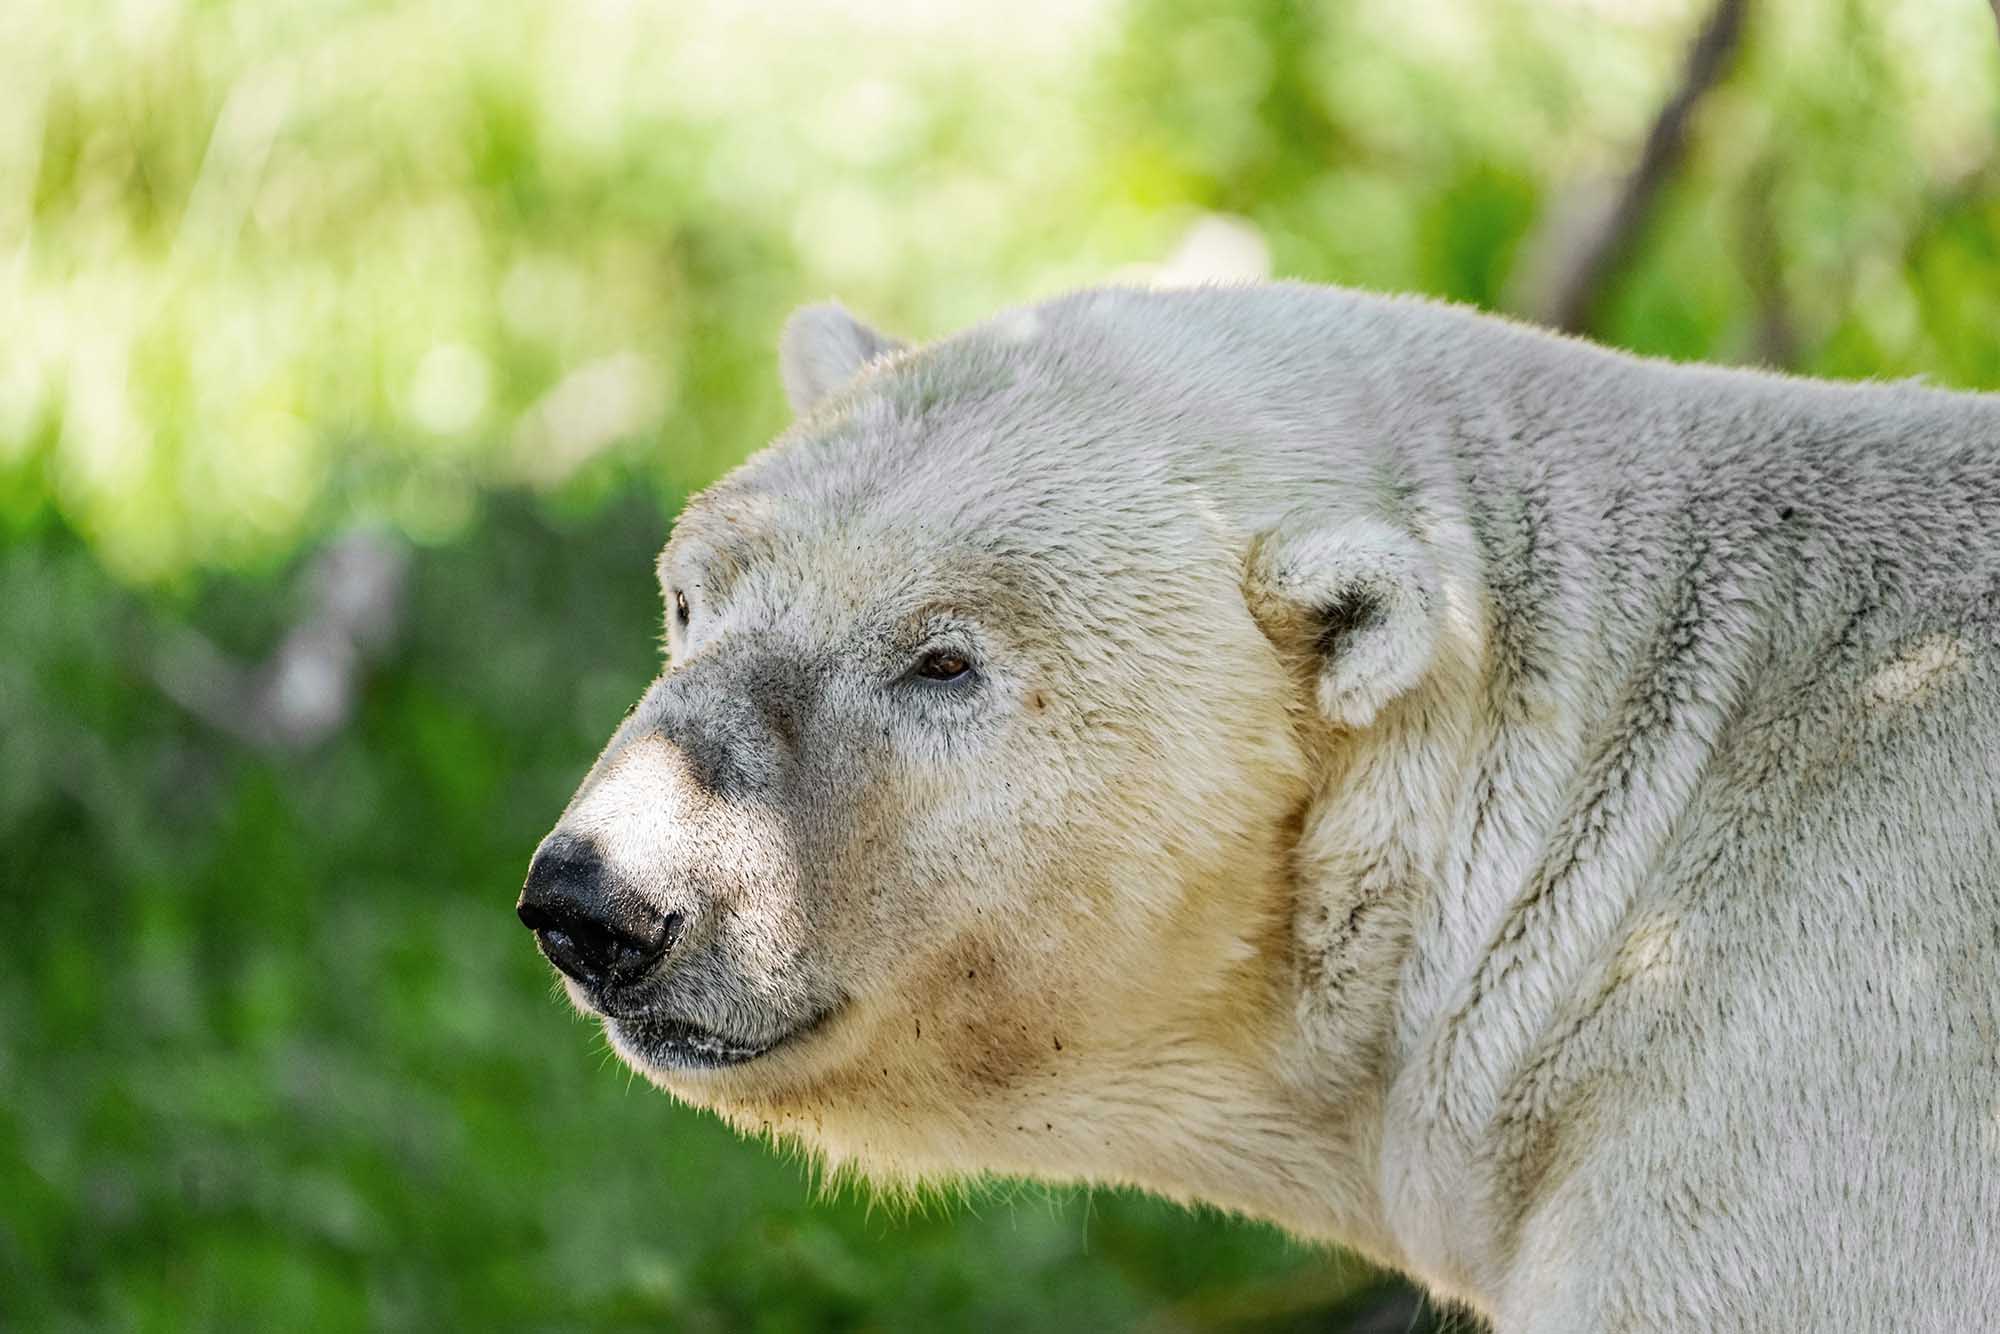 Polar Bear Sent To Another Zoo As Cub Comes Back To World’s Oldest Zoo After 15 Years